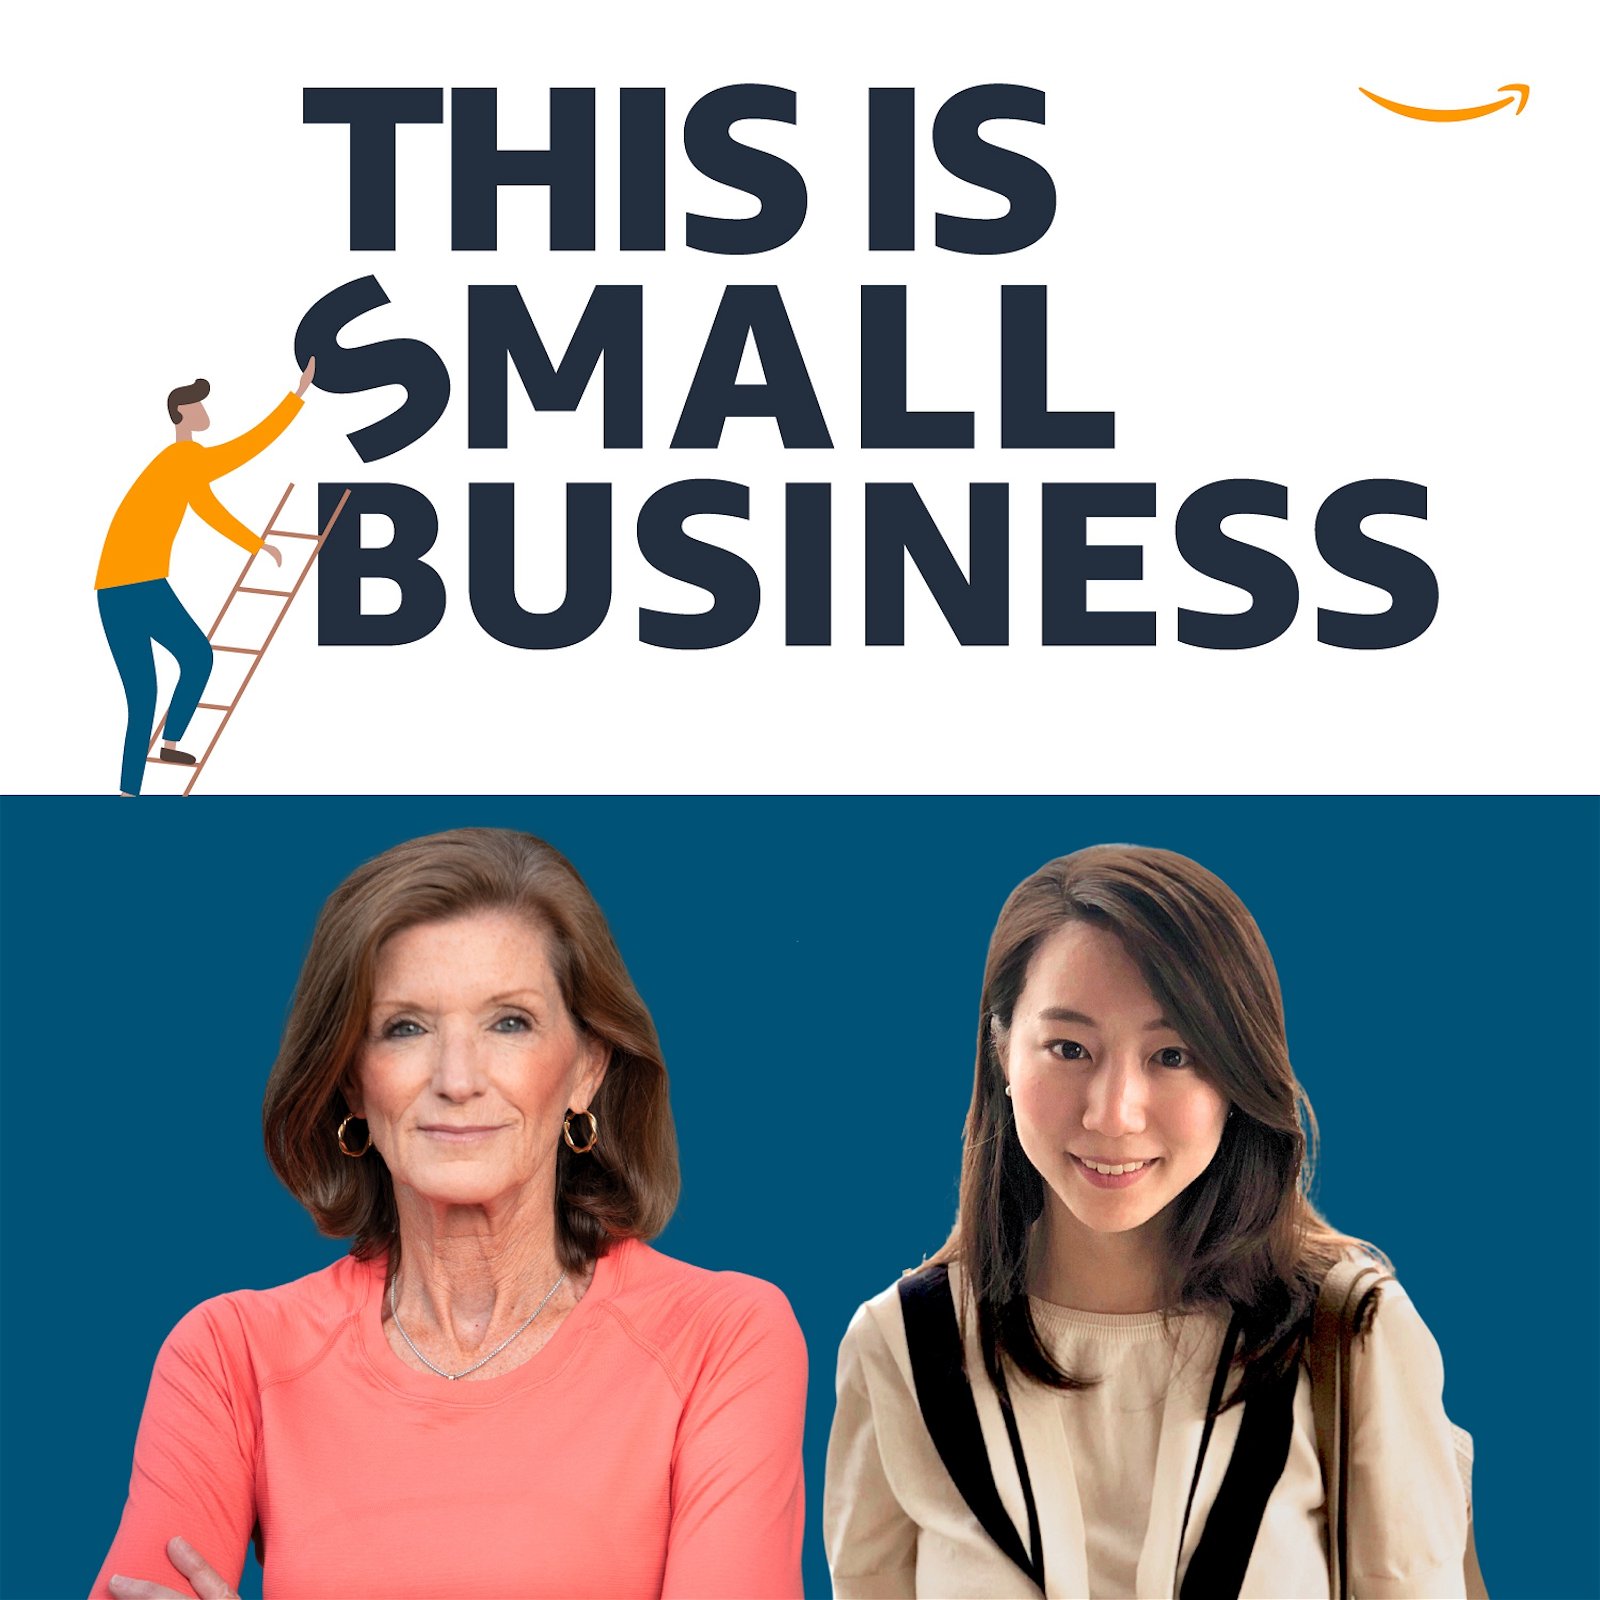 Small Business Fun Facts: What to Know Before Starting a Small Business